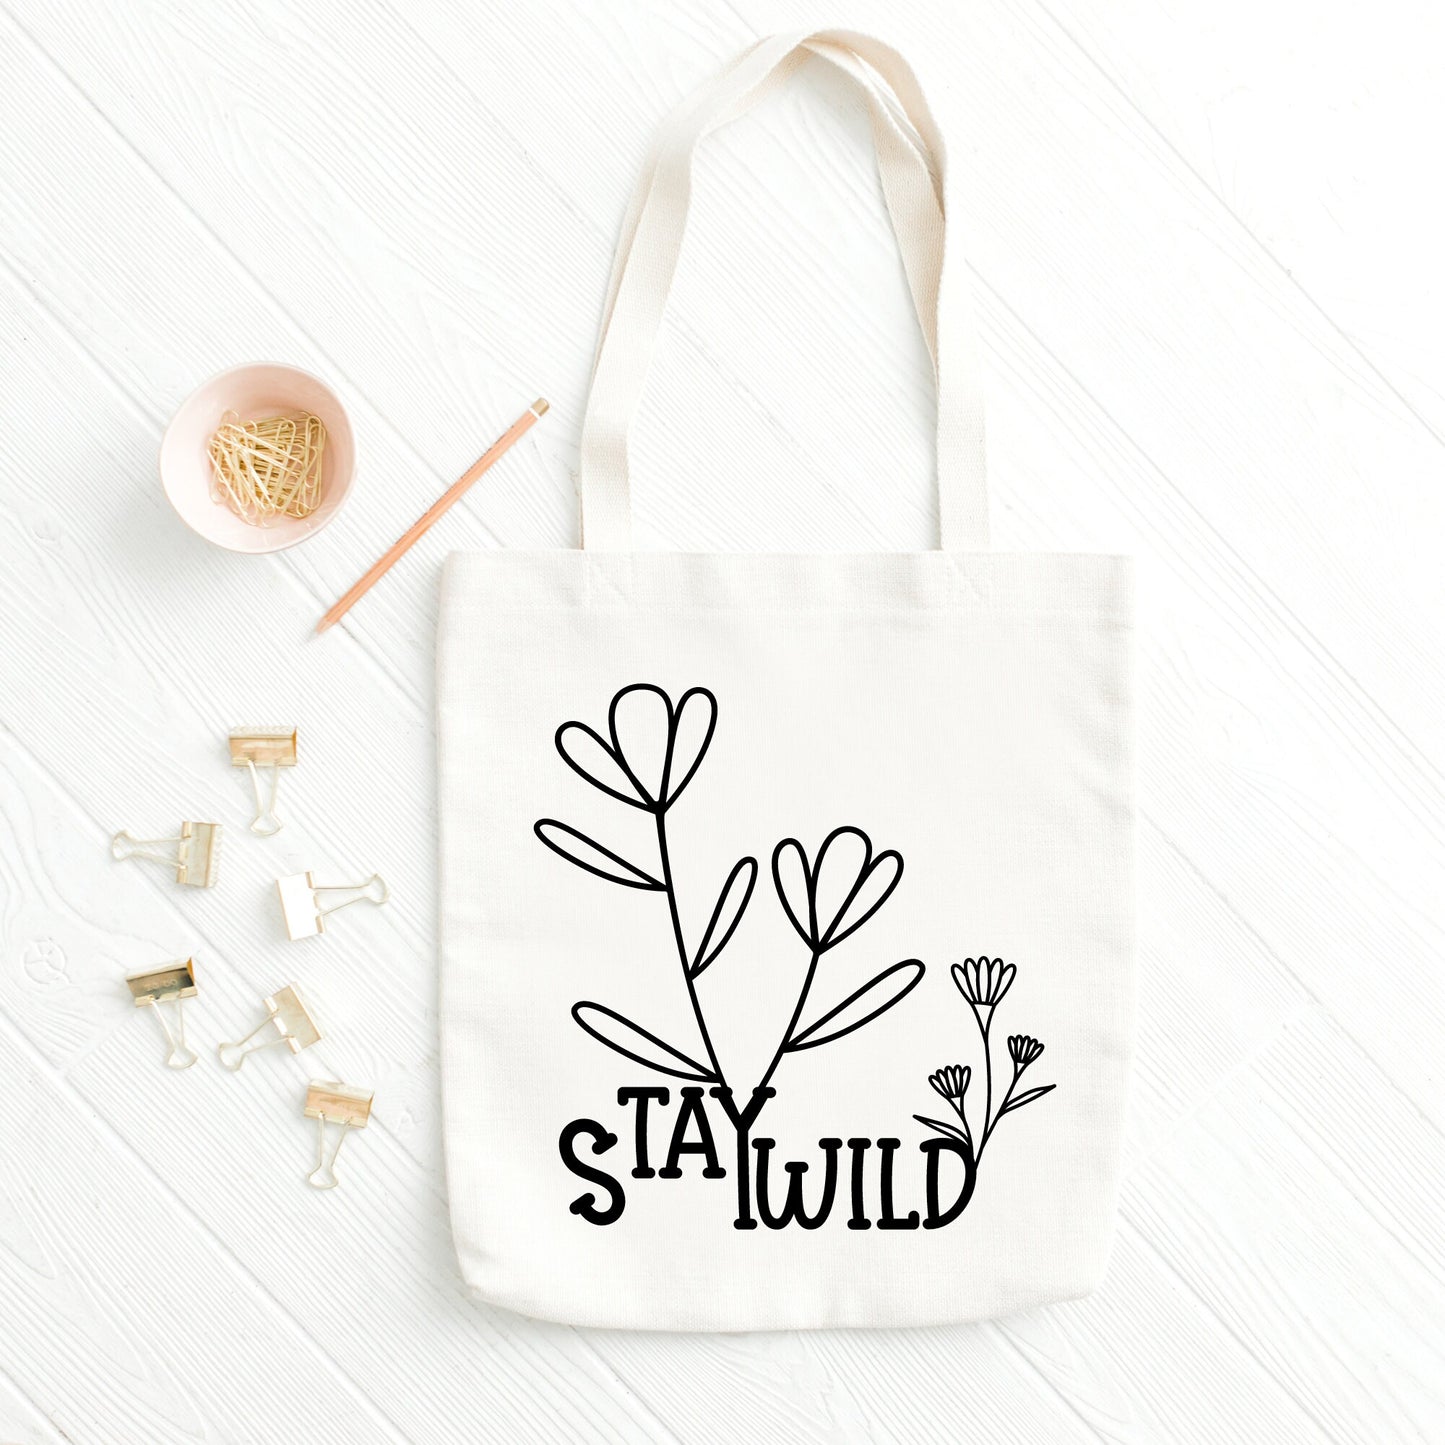 Stay Wild Tote Bag, Floral Tote Bag for Life, Positivity Gift, Mother’s Day Gift, Gift for her, friend Presents